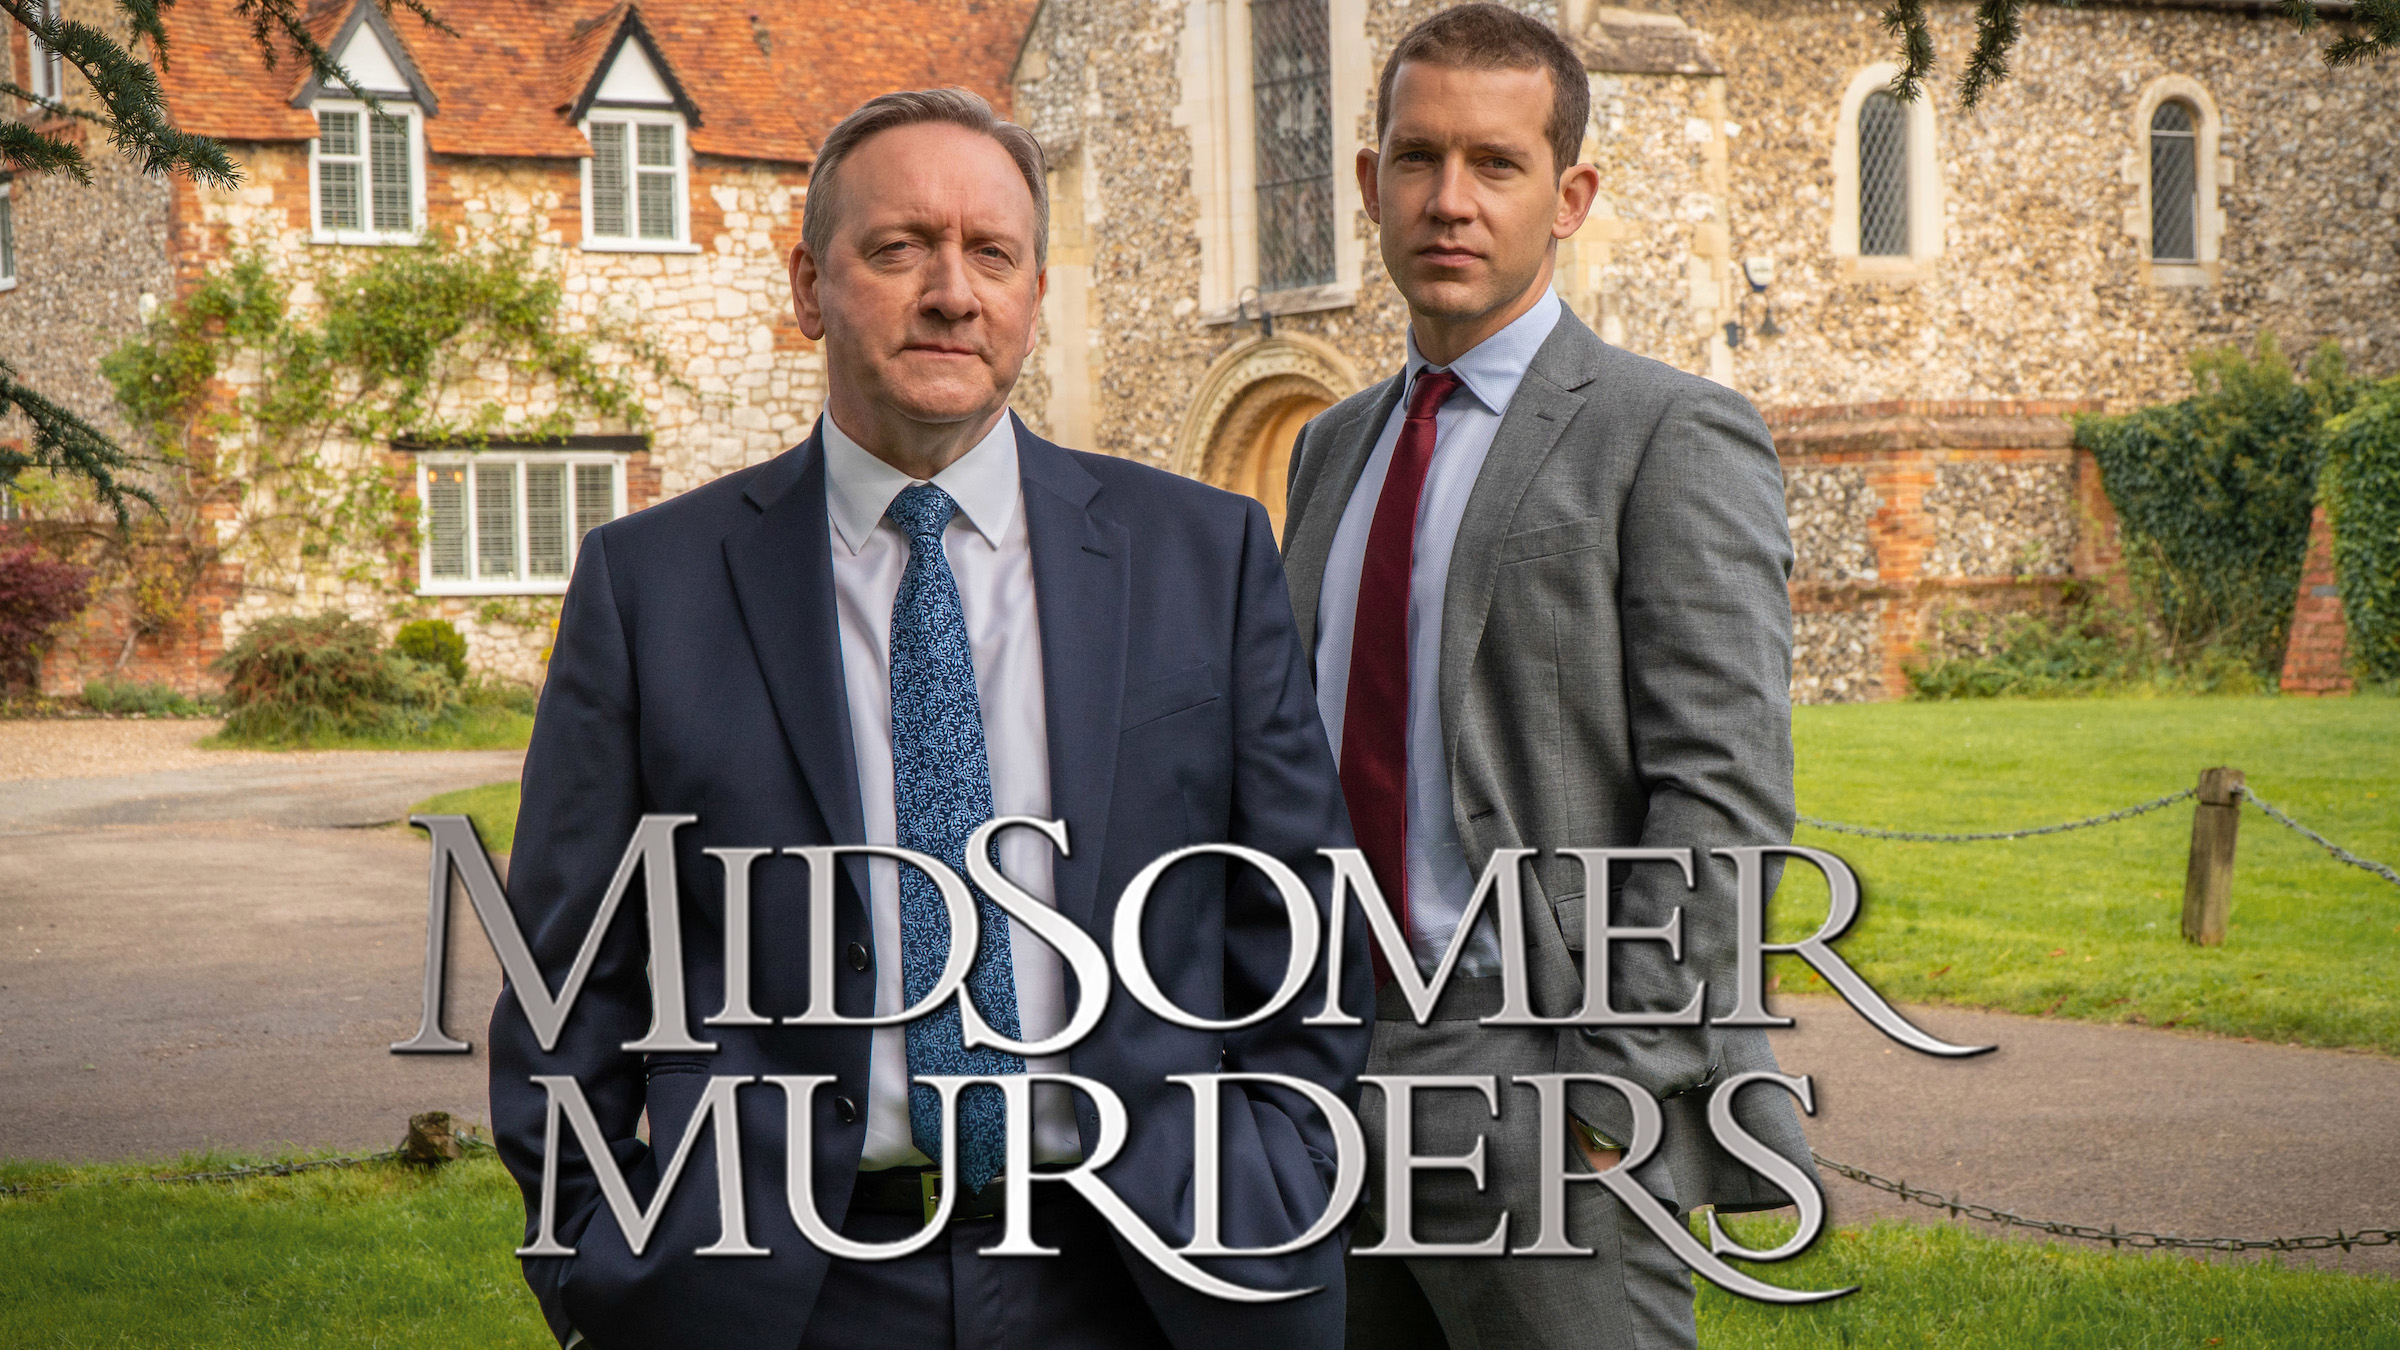 Season 22 follows Barnaby and Winter as they investigate an urban myth becoming a murderous reality, a post-operative heart rehabilitation club whose members’ dreams of a second chance at life are cut short, a murder mystery weekend, a twisted scarecrow festival and an amateur drama company with deadly secrets.